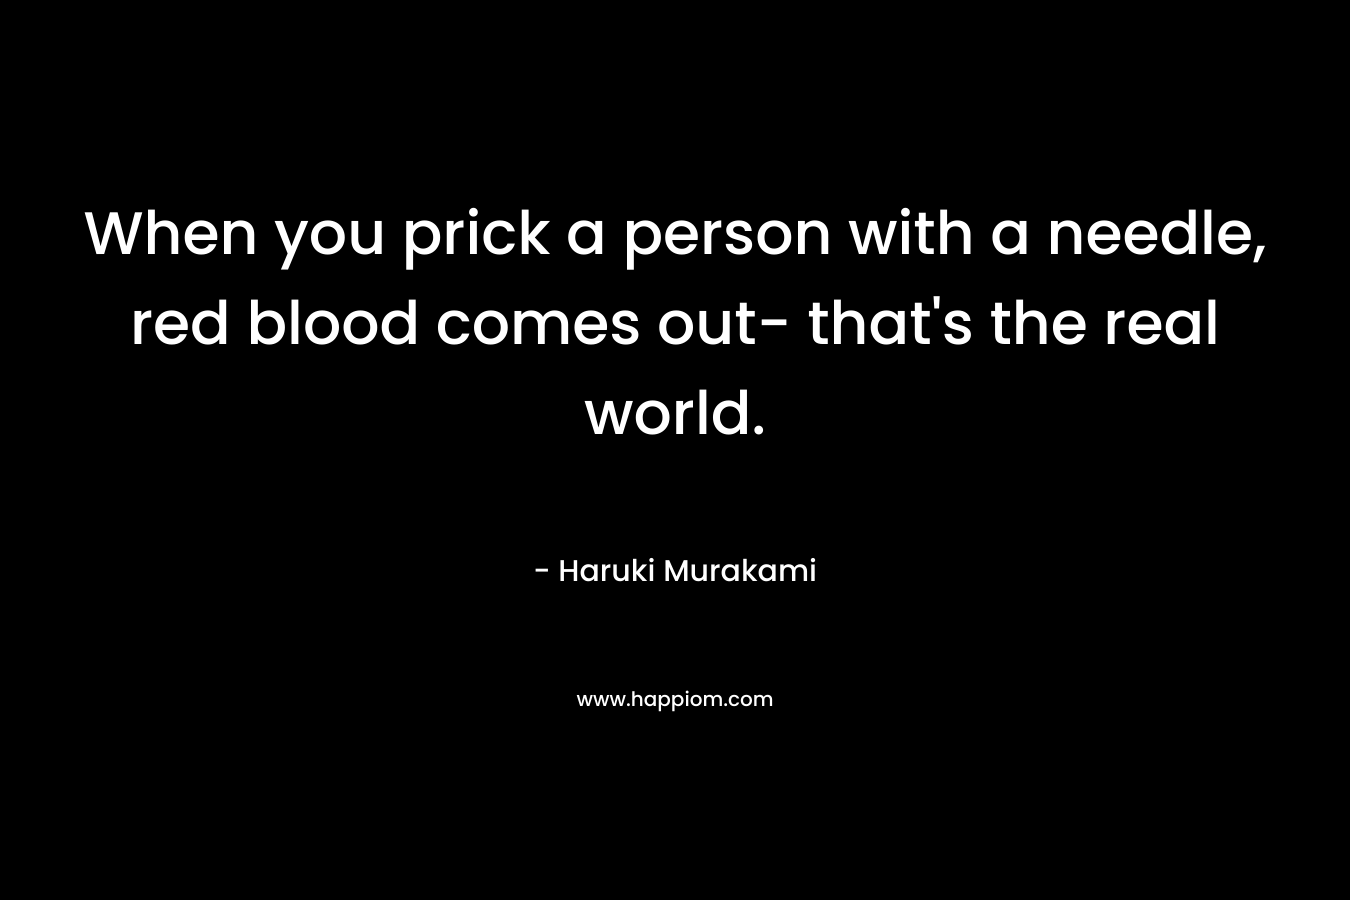 When you prick a person with a needle, red blood comes out- that's the real world.